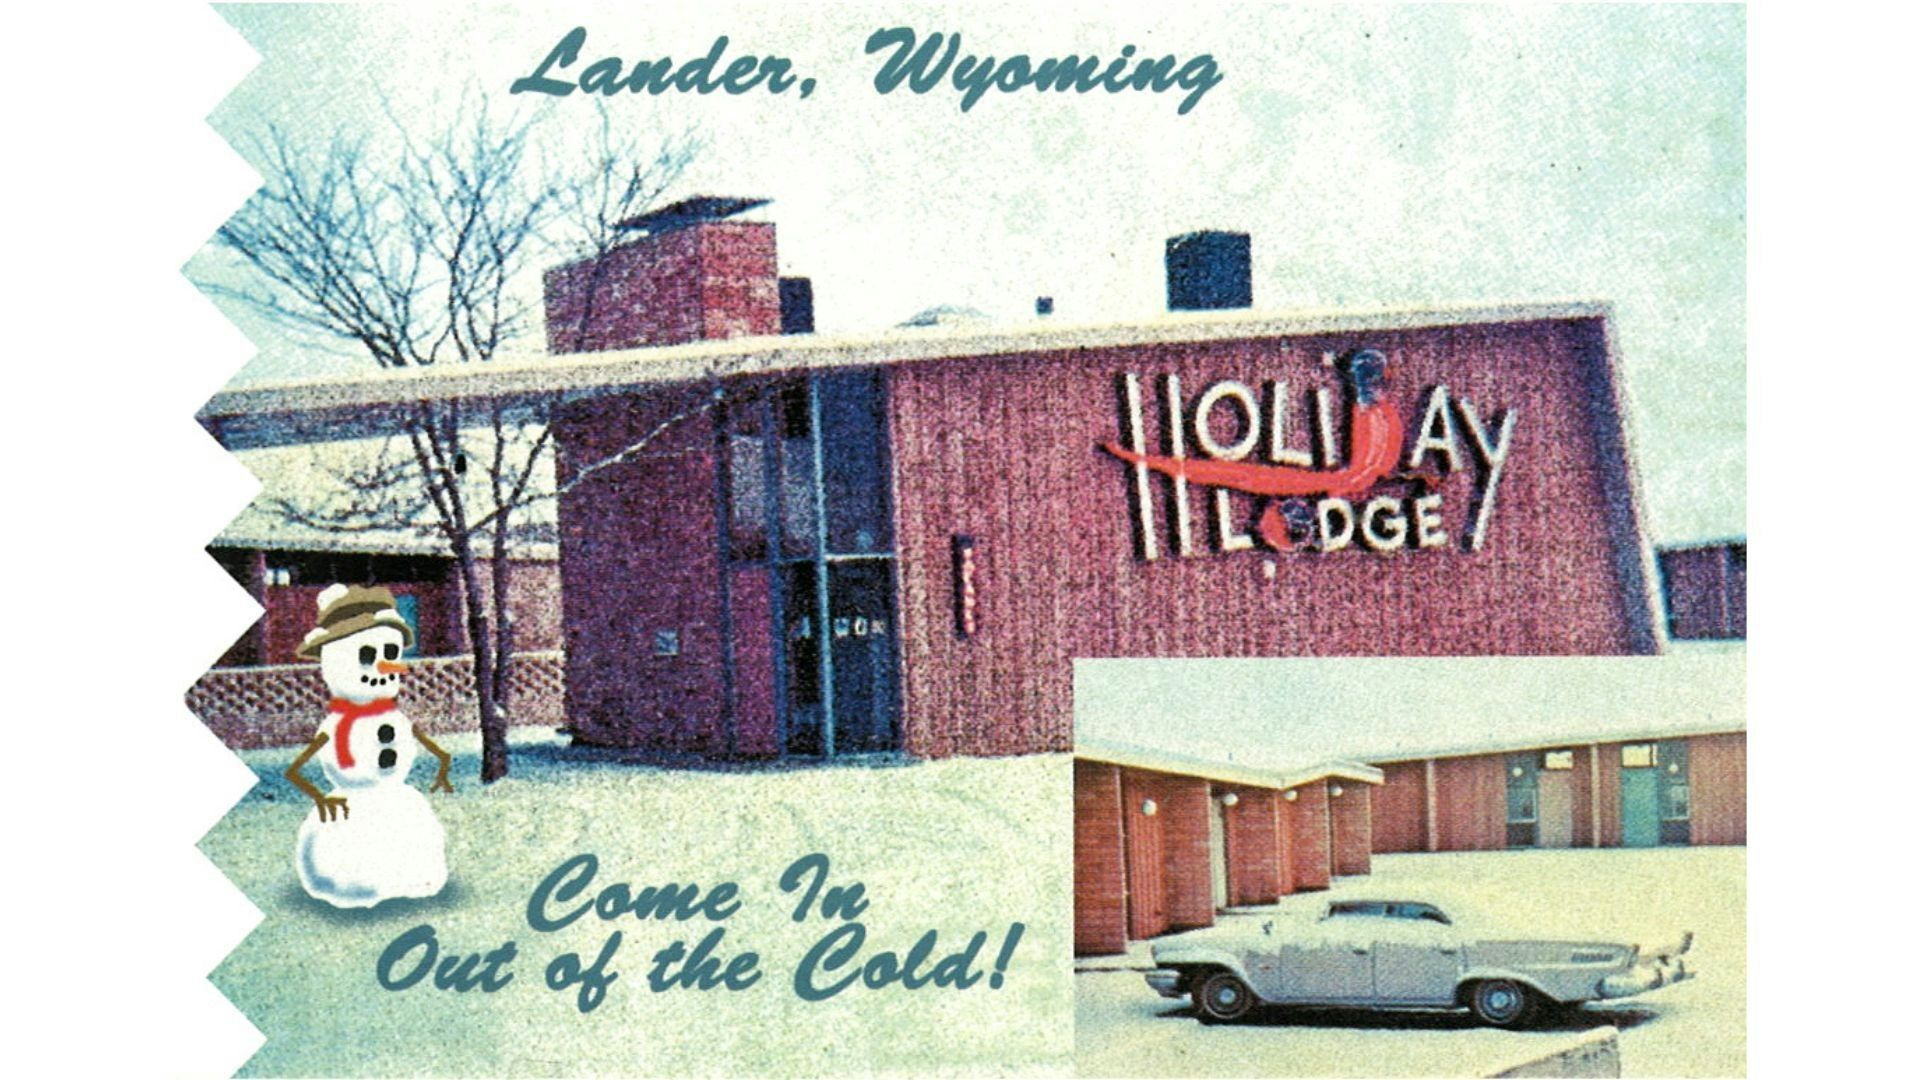 Hoiliday Lodge sign Holiday Lodge Old Ad2 6 17 23